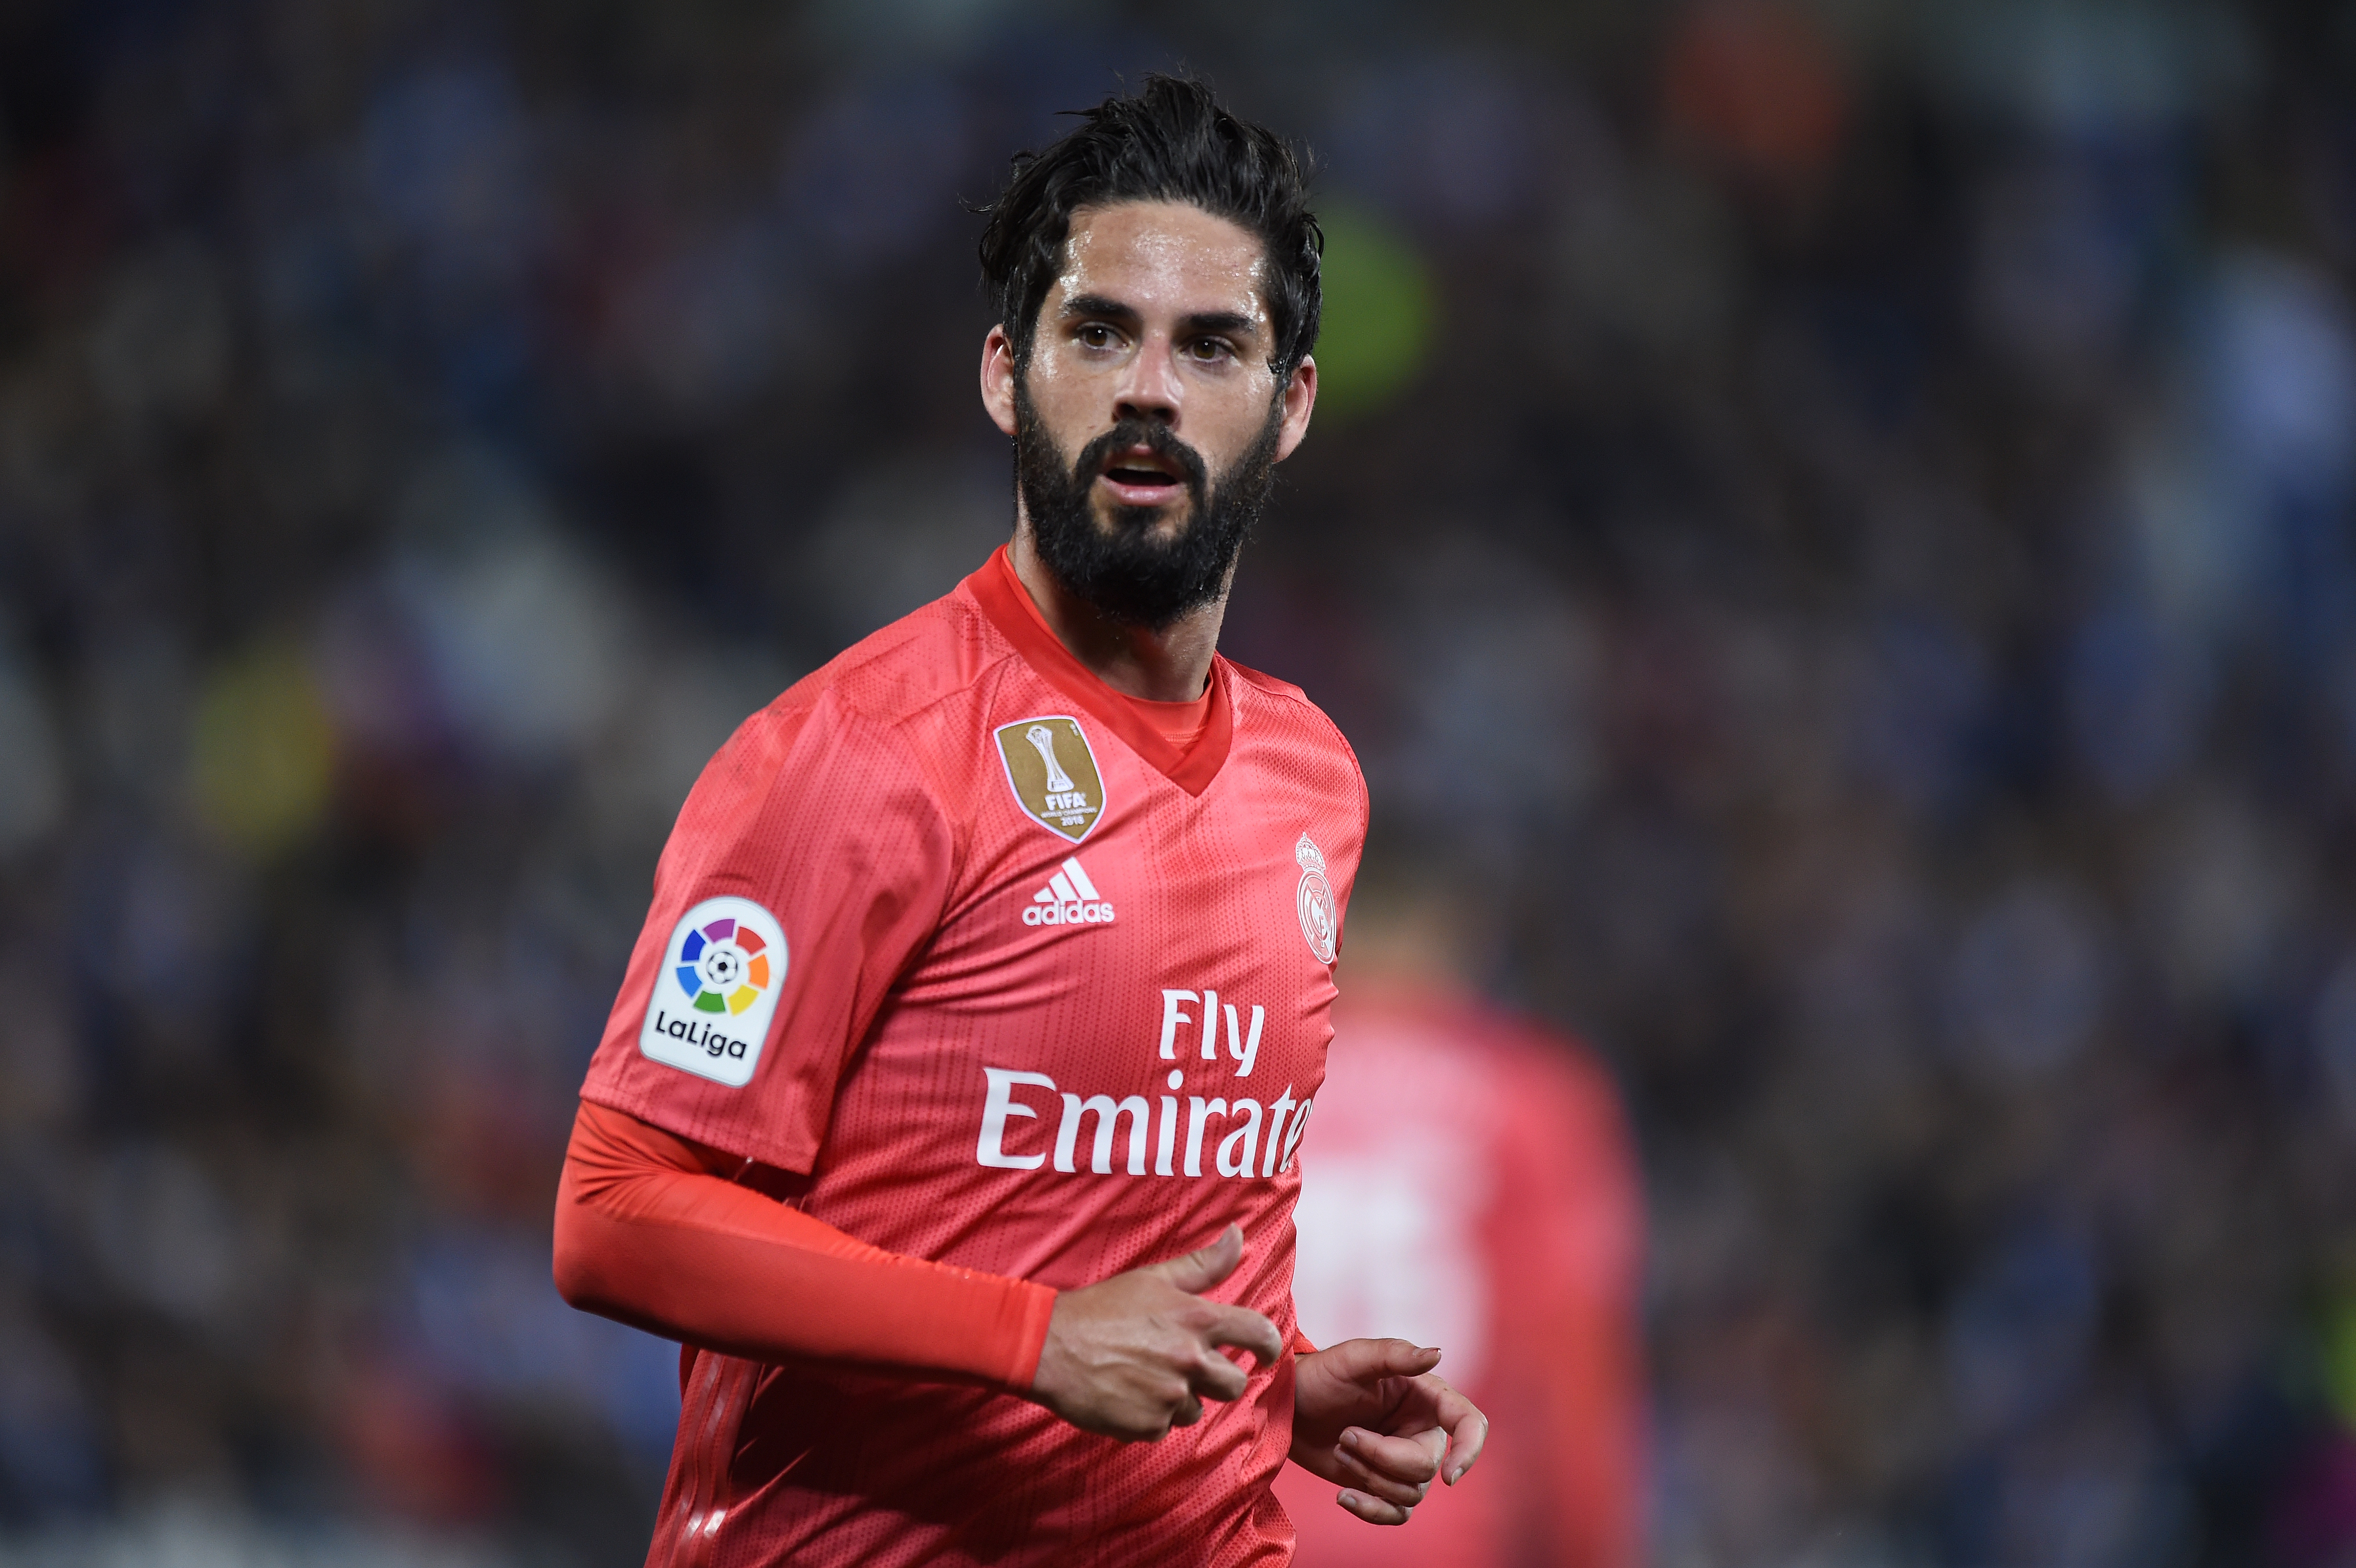 LEGANES, SPAIN - APRIL 15:  Isco Alarcon of Real Madrid looks on during the La Liga match between CD Leganes and Real Madrid CF at Estadio Municipal de Butarque on April 15, 2019 in Leganes, Spain. (Photo by Denis Doyle/Getty Images)